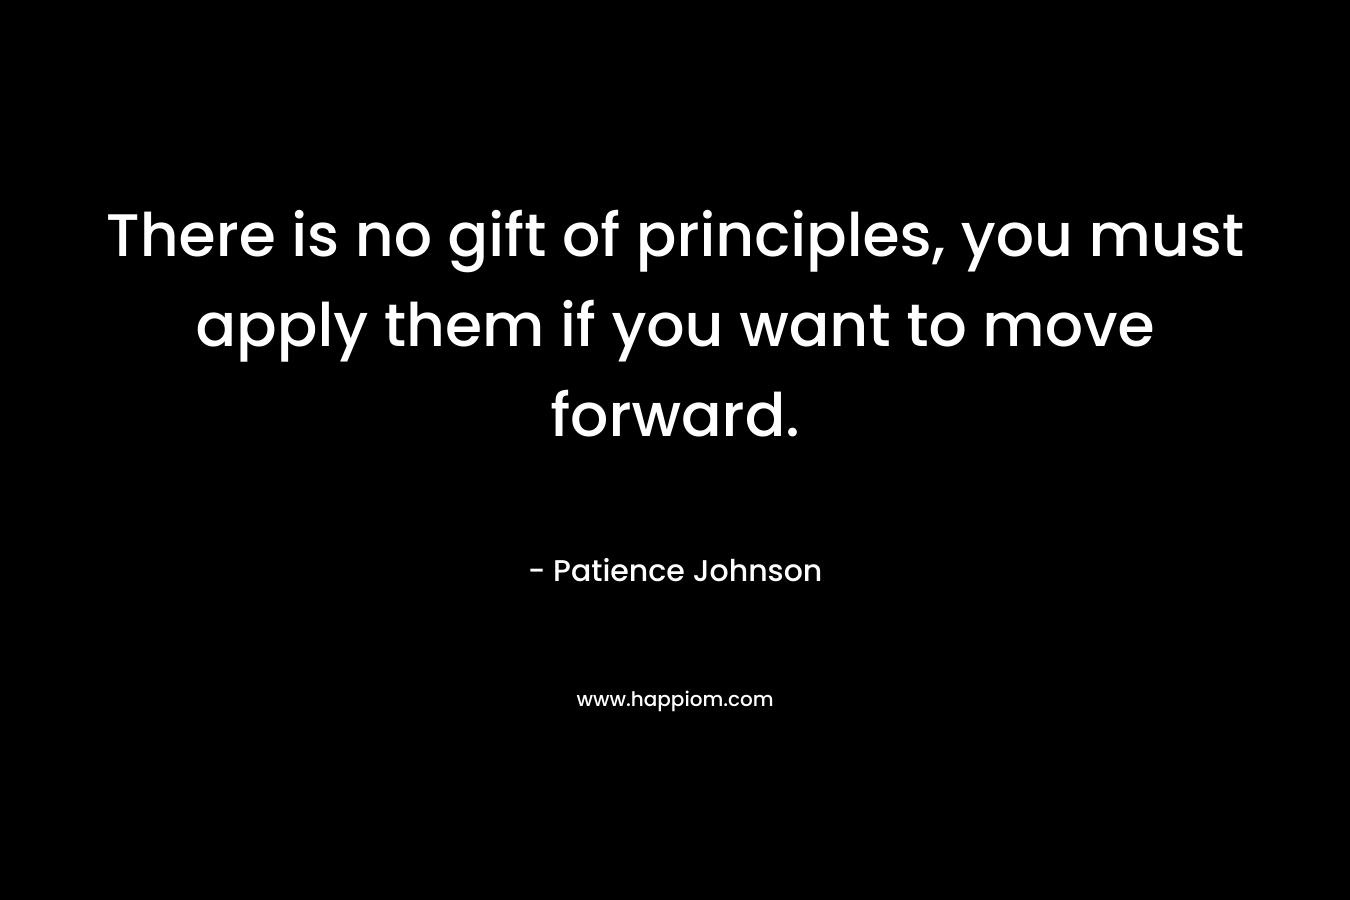 There is no gift of principles, you must apply them if you want to move forward.